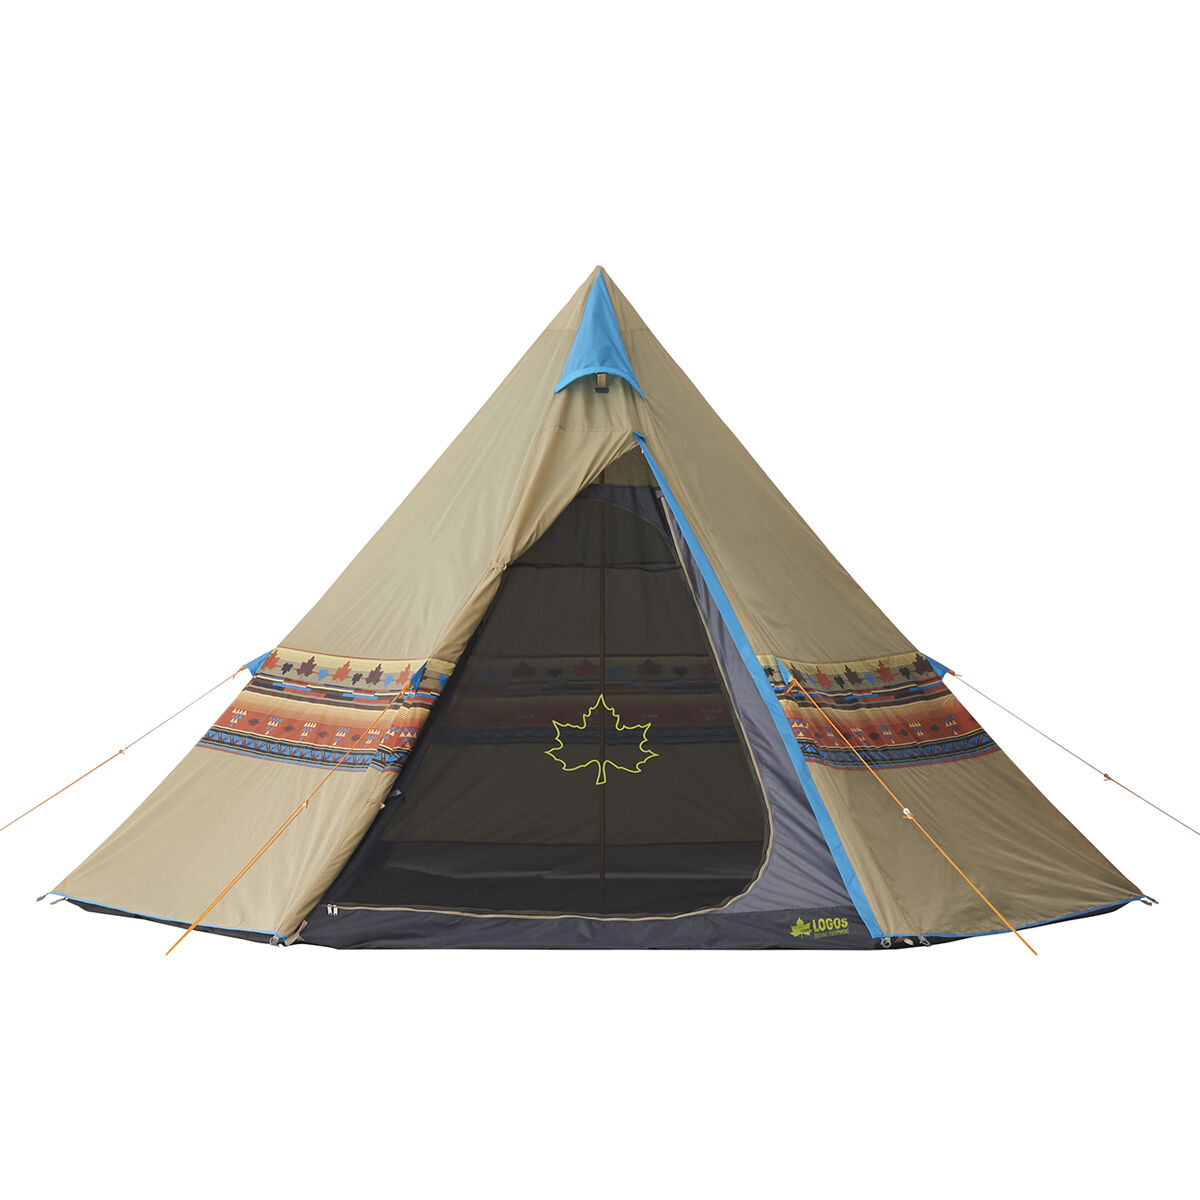 Shop Tents | LOGOS Official Global Online Store